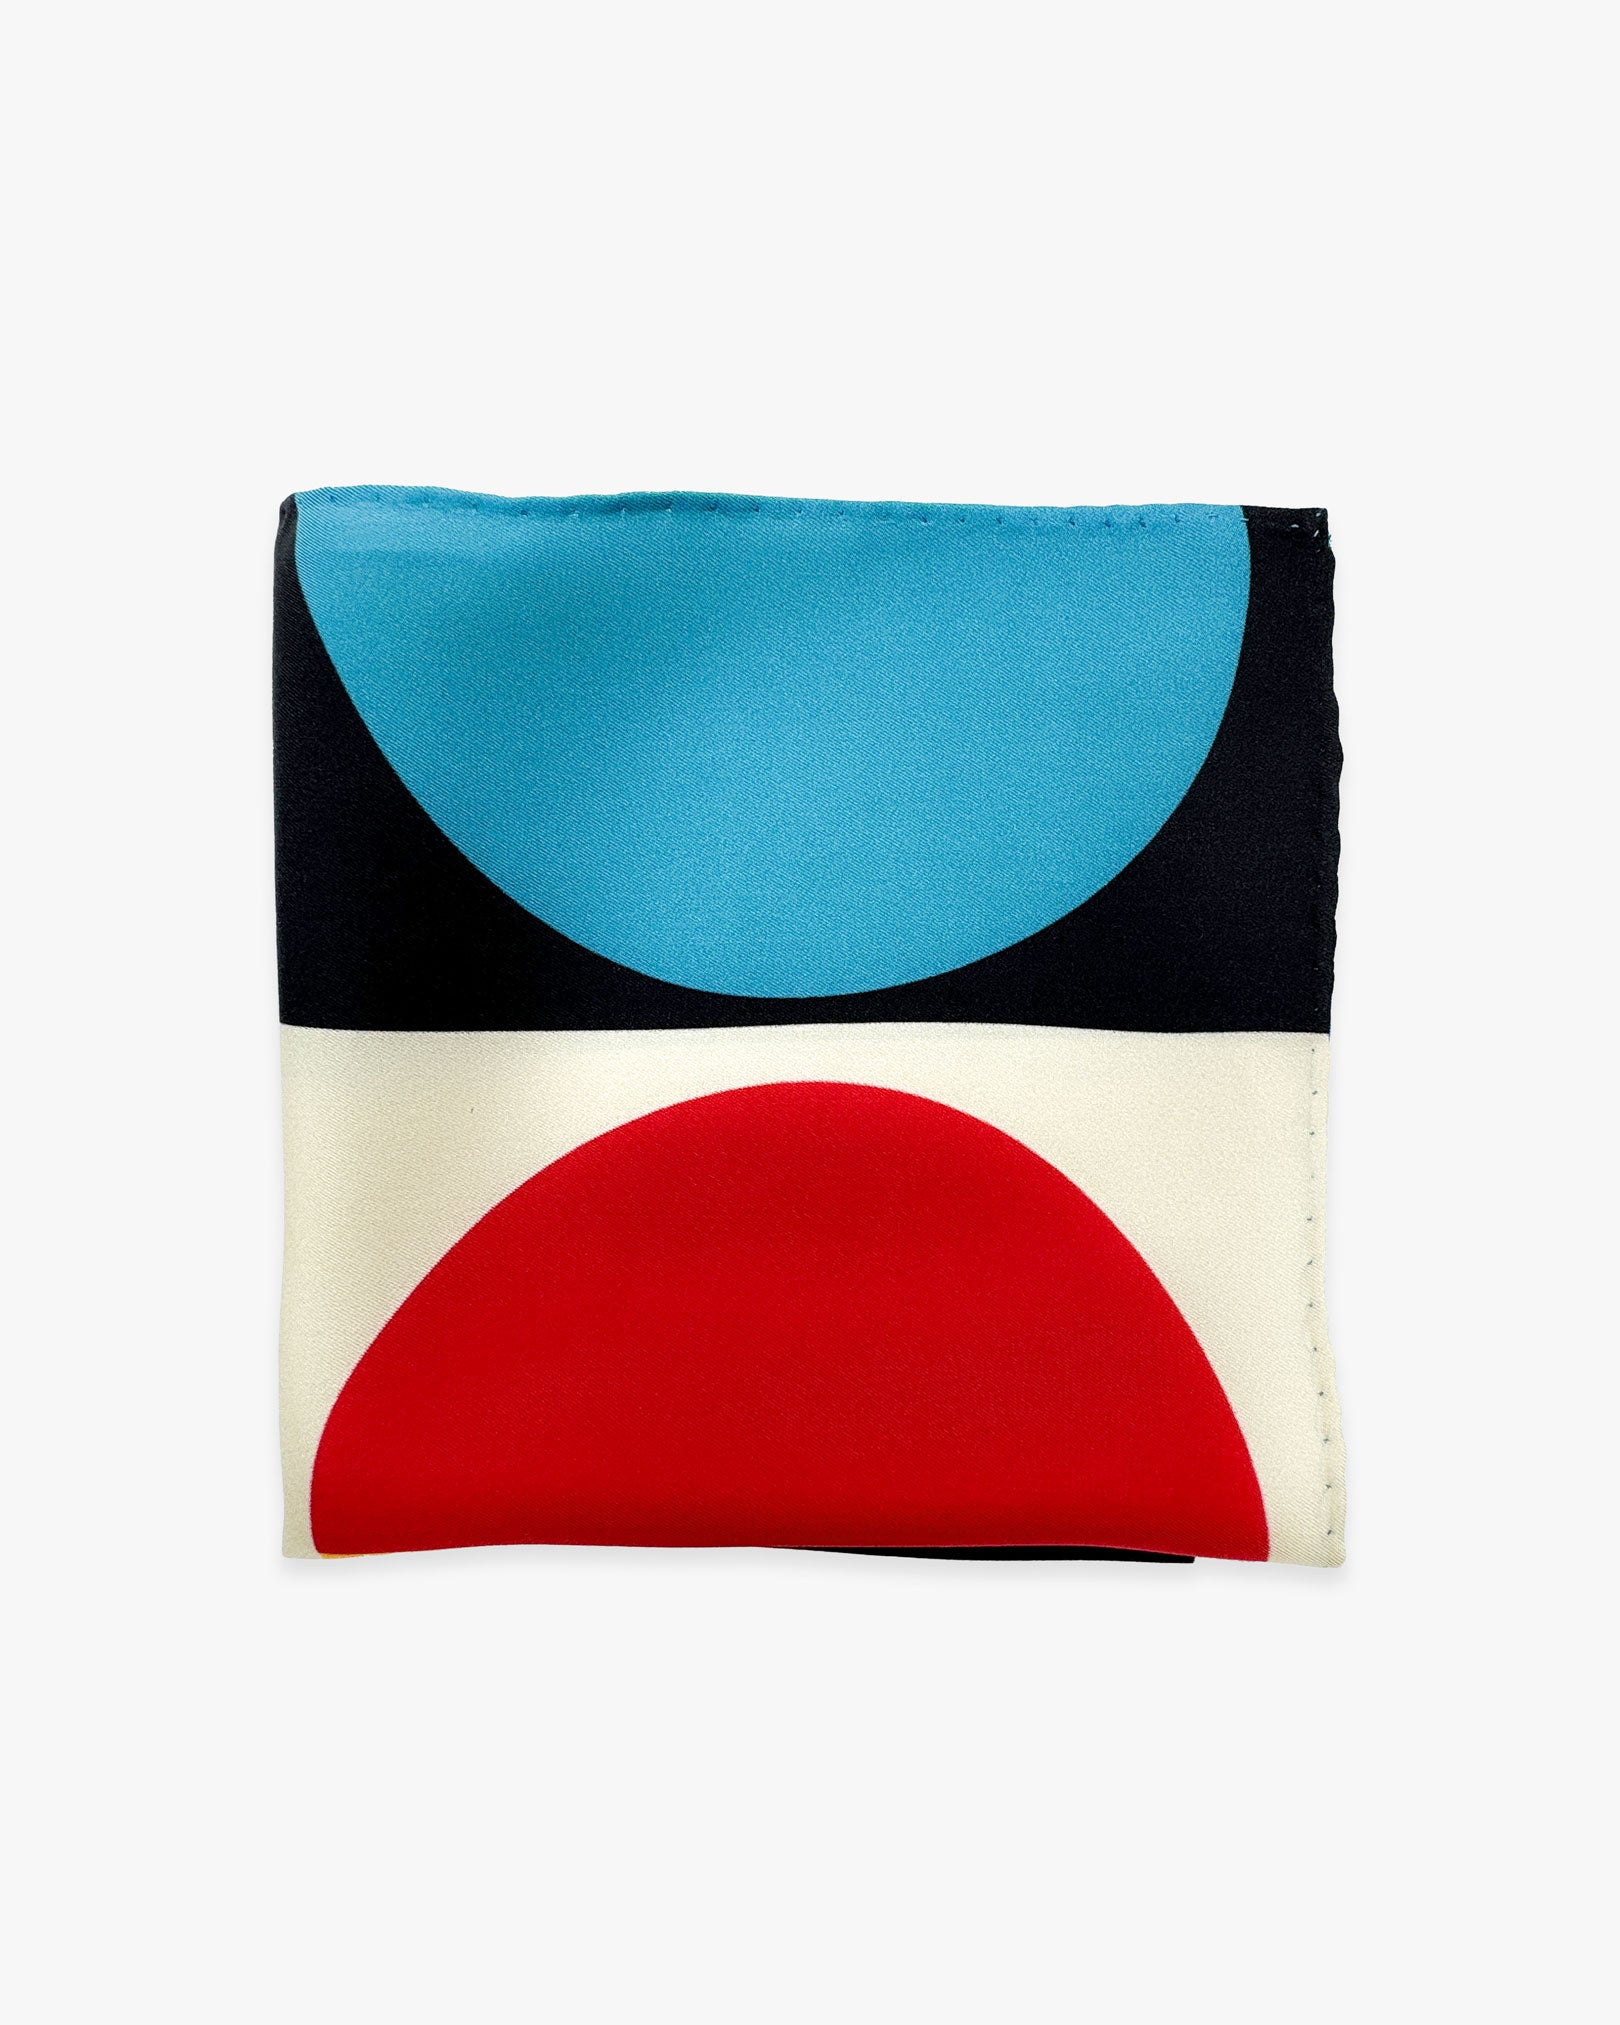 The 'Weimar' silk pocket square from SOHO Scarves folded into a quarter, showing the blue, red and monochrome portion of the semicircular disc pattern.